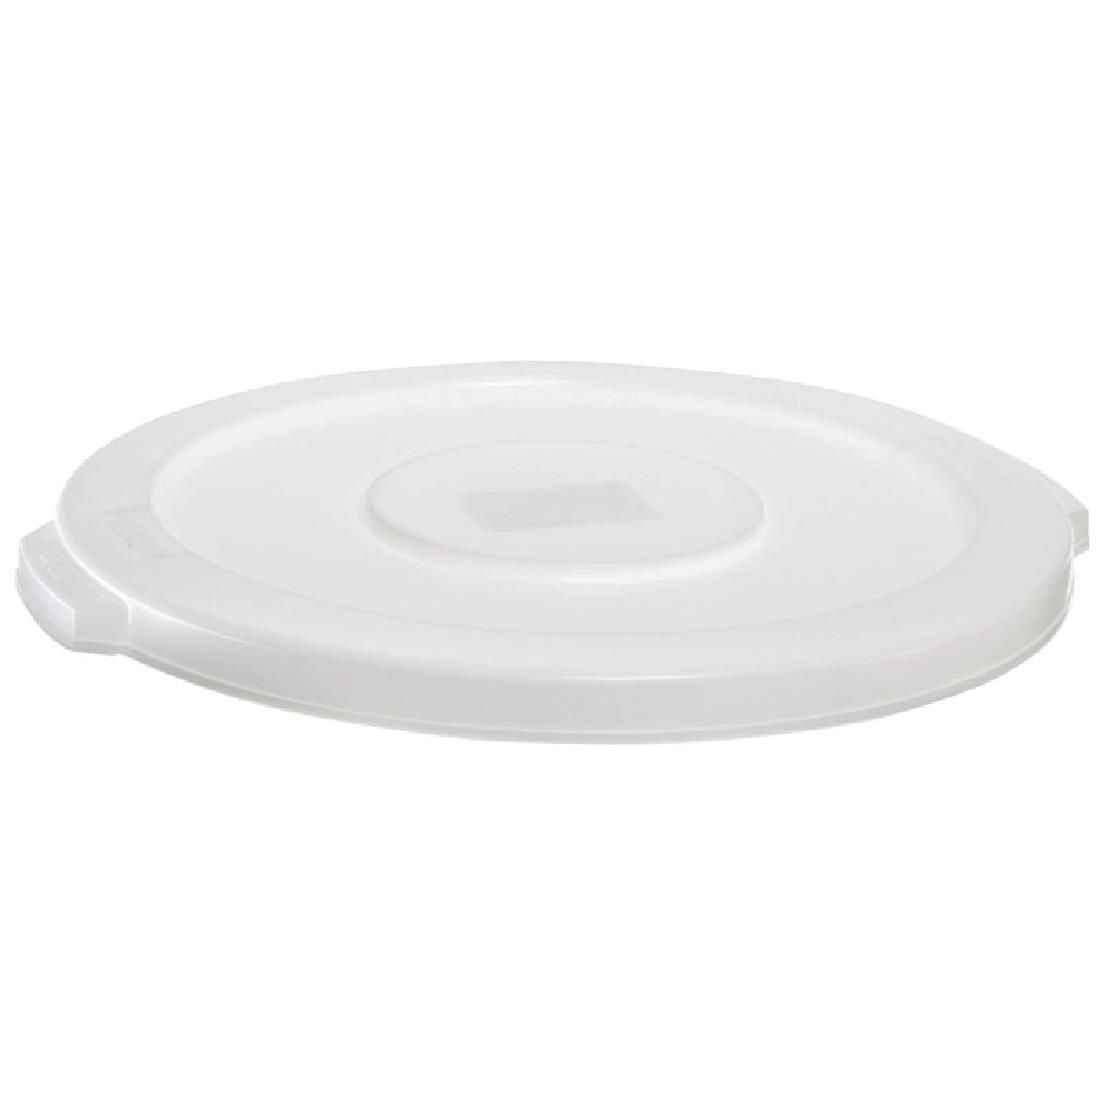 L662 Rubbermaid Round Brute Container Lid 121.1Ltr